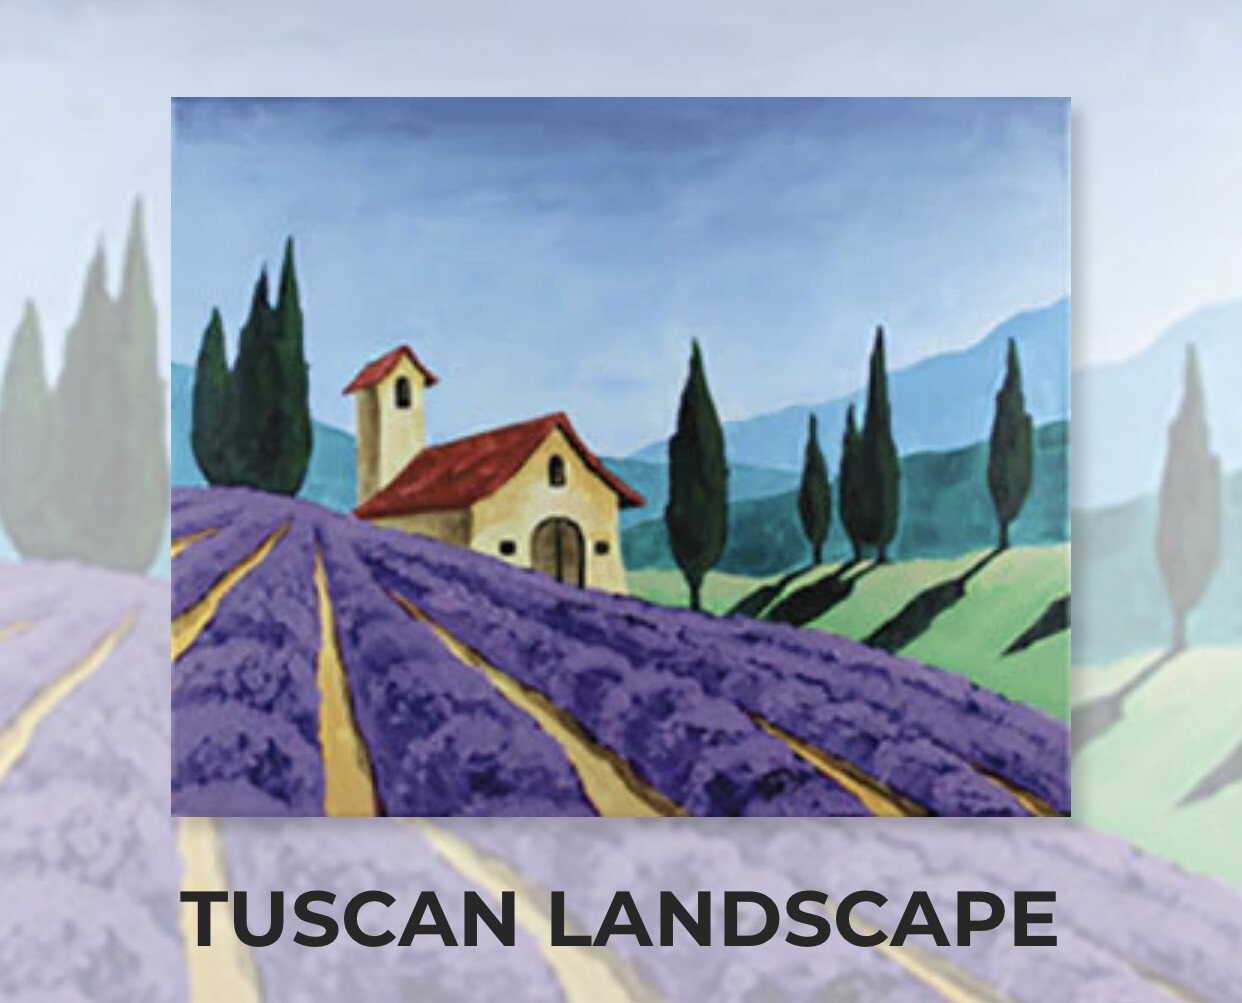 Tuscan Landscape ADULT Acrylic Paint On Canvas DIY Art Kit - 3 Week Special Order